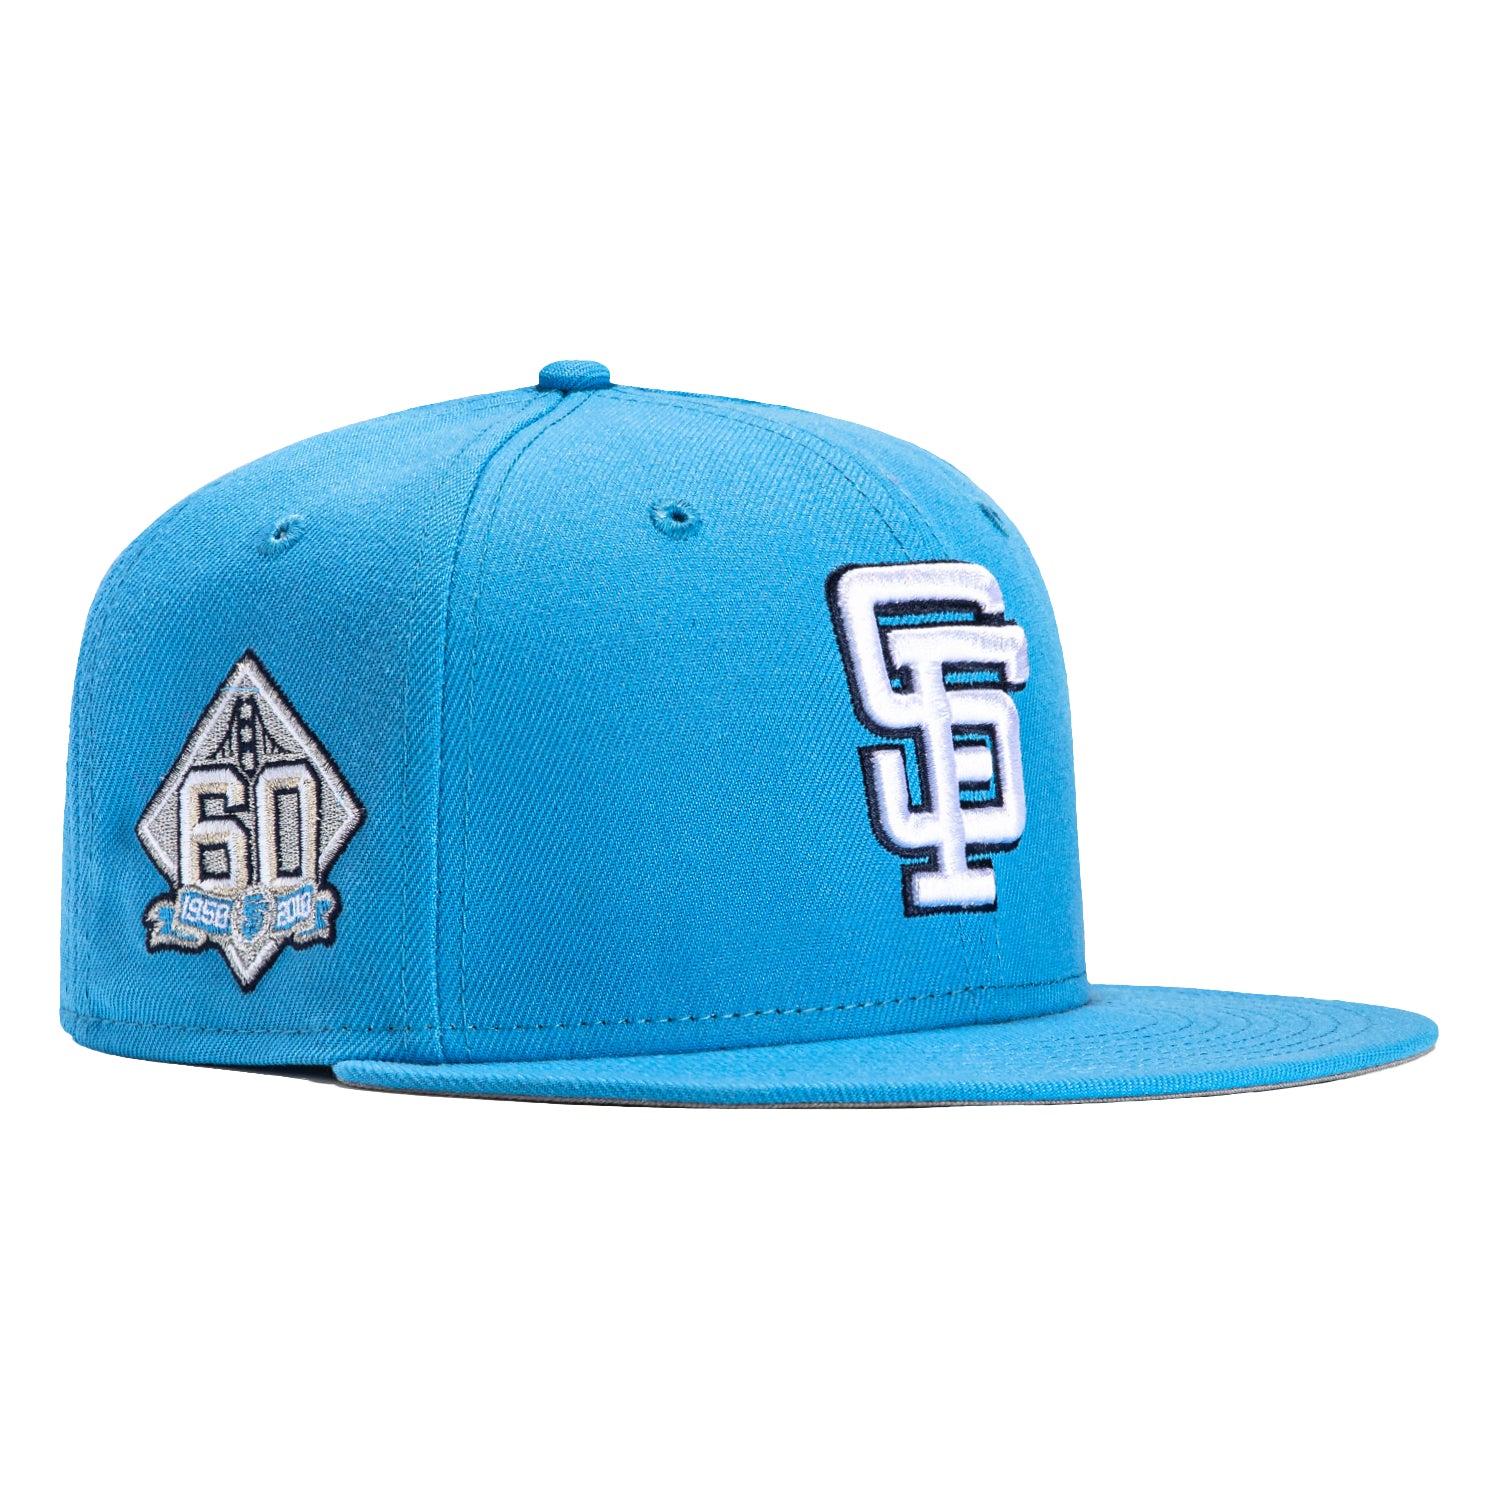 Throwback Los Angeles Lakers Sky Blue/White Fitted Cap - 7 1/8